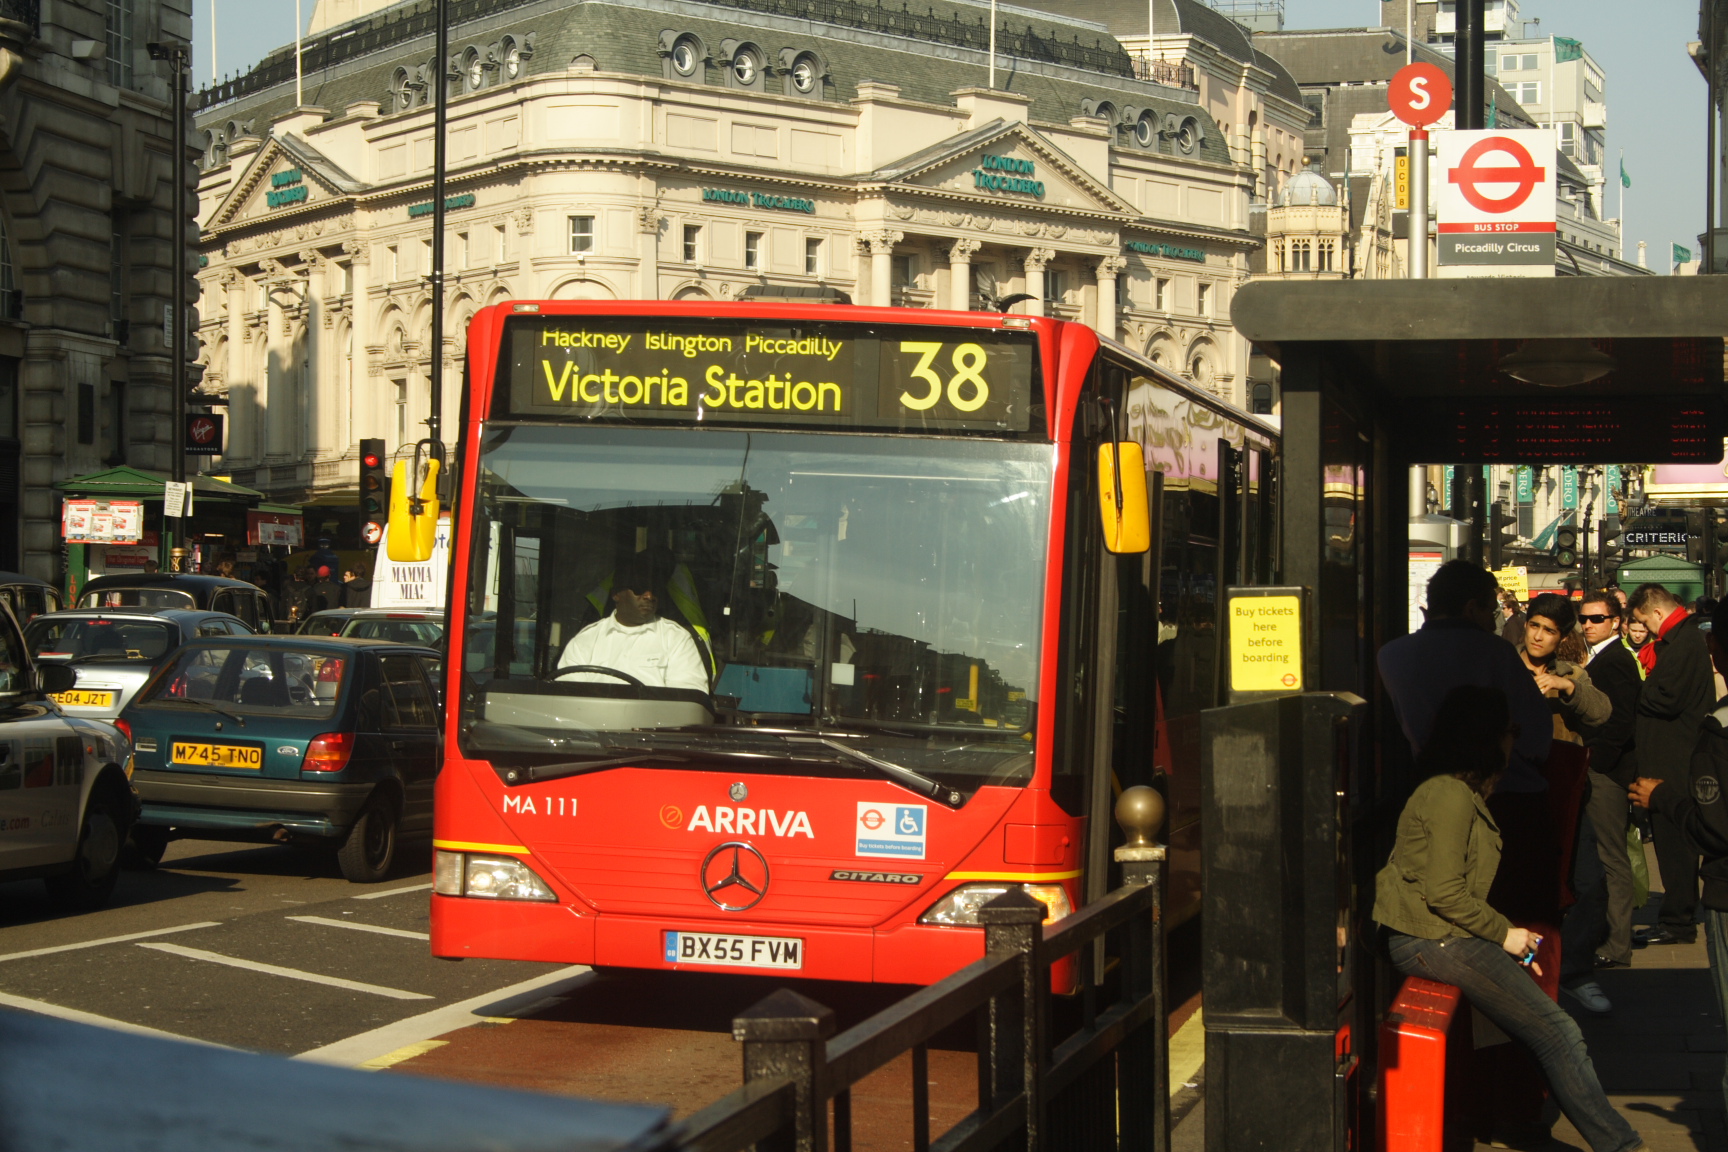 resultaat Corrupt Stroomopwaarts File:London Bus route 38 at Picadilly.jpg - Wikimedia Commons